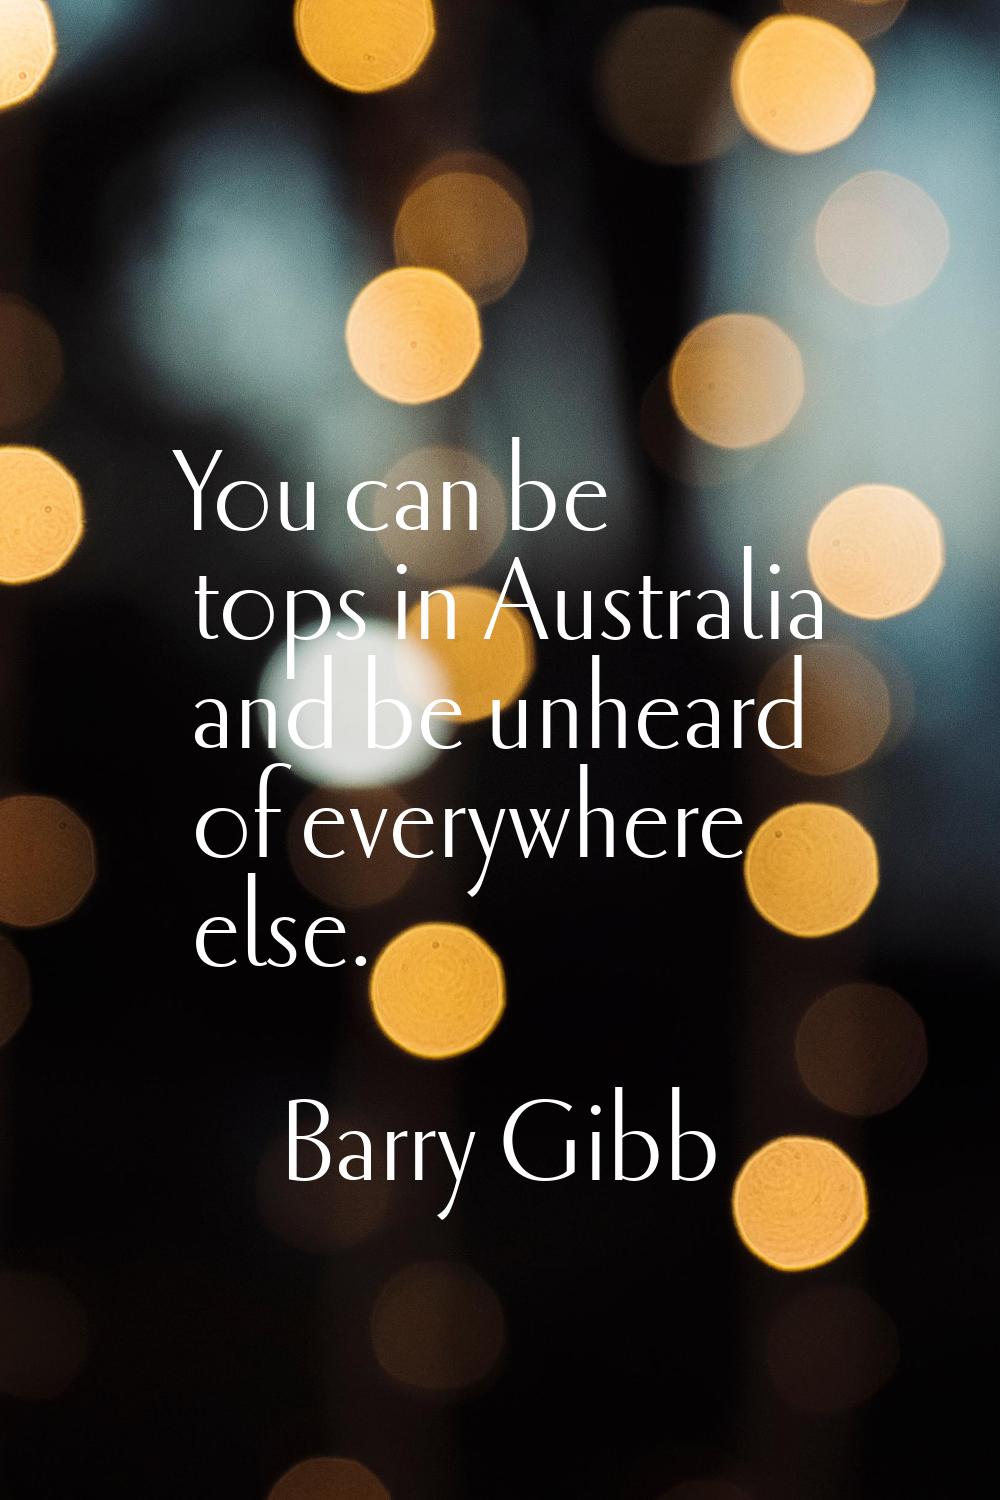 You can be tops in Australia and be unheard of everywhere else.